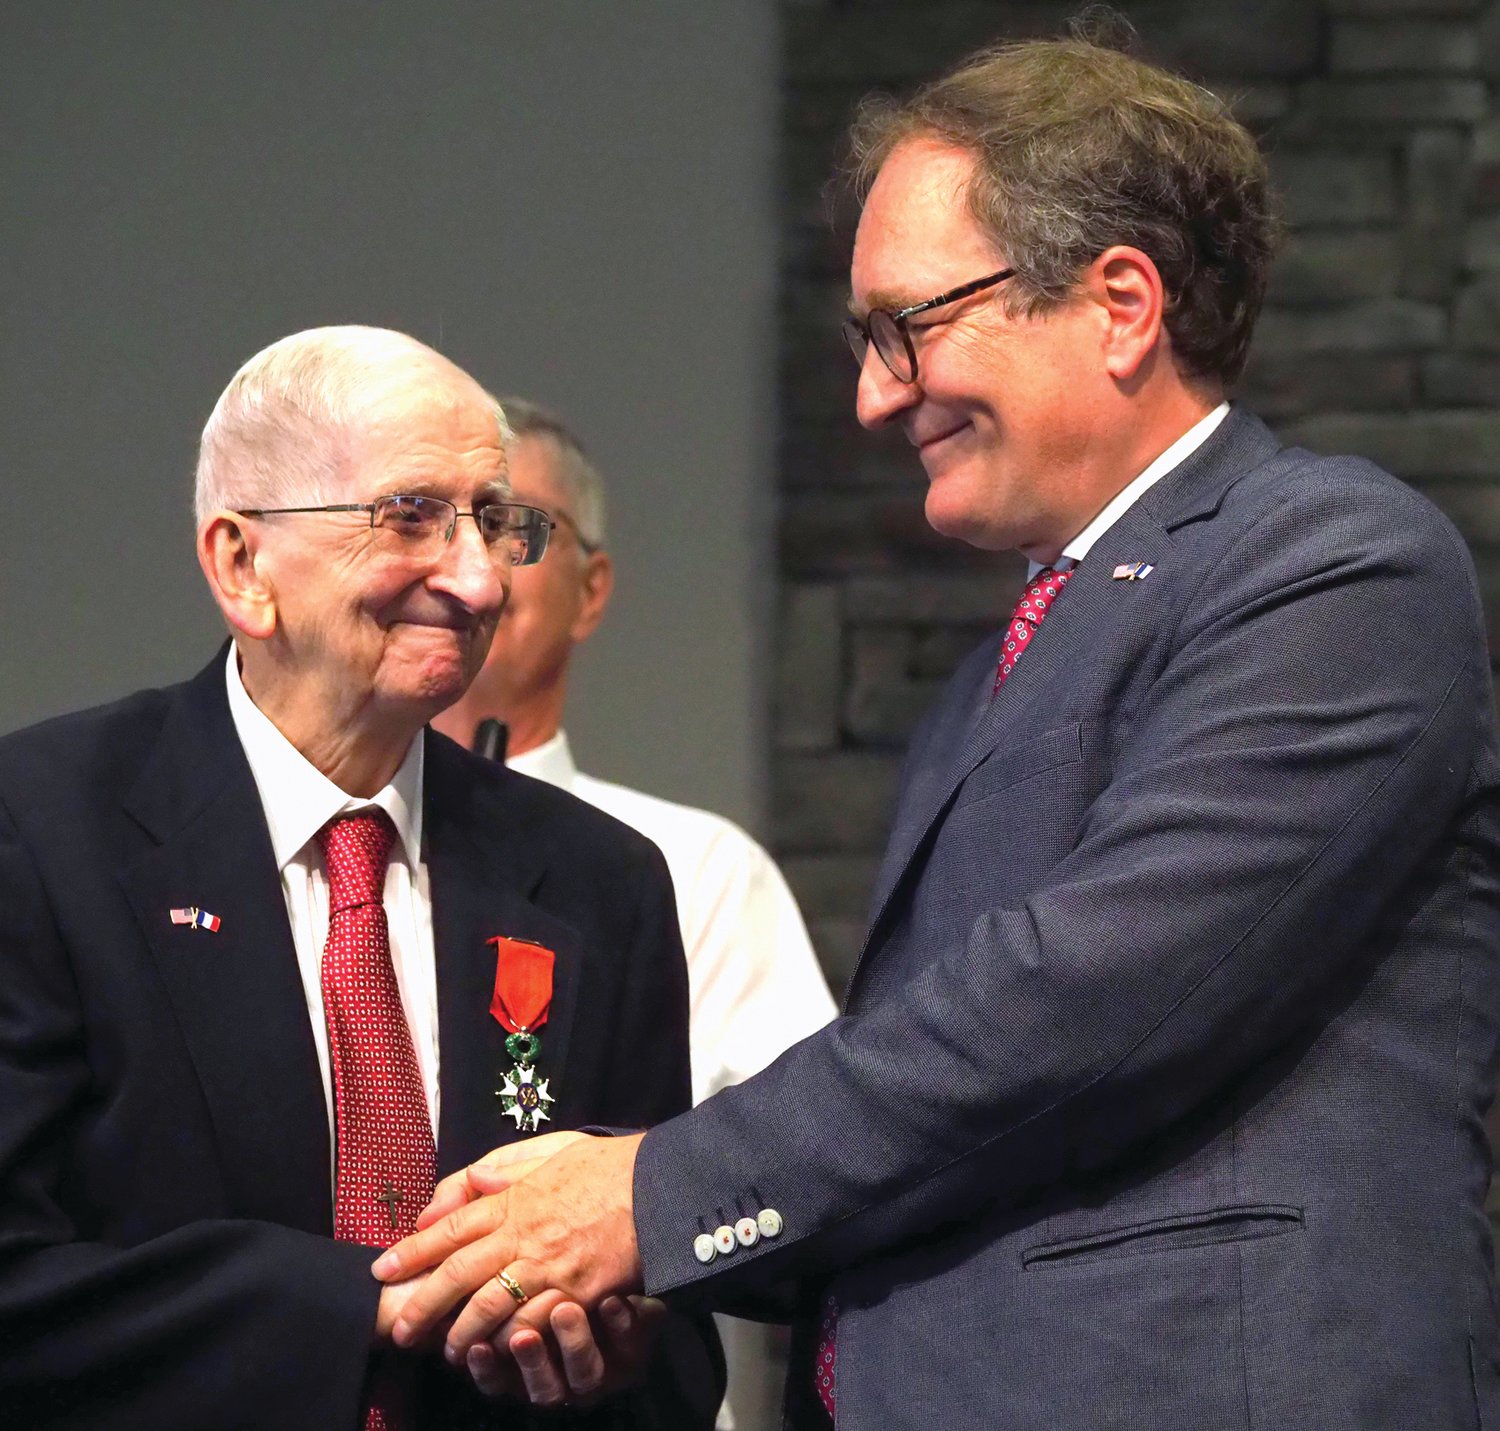 Wesley Hart, a 102-year-old Chatham County resident, is awarded the French Legion of Honor from Vincent Hommeril of the French consulate in Atlanta. Hart's ceremony took place last Thursday at New Salem Church in Pittsboro.